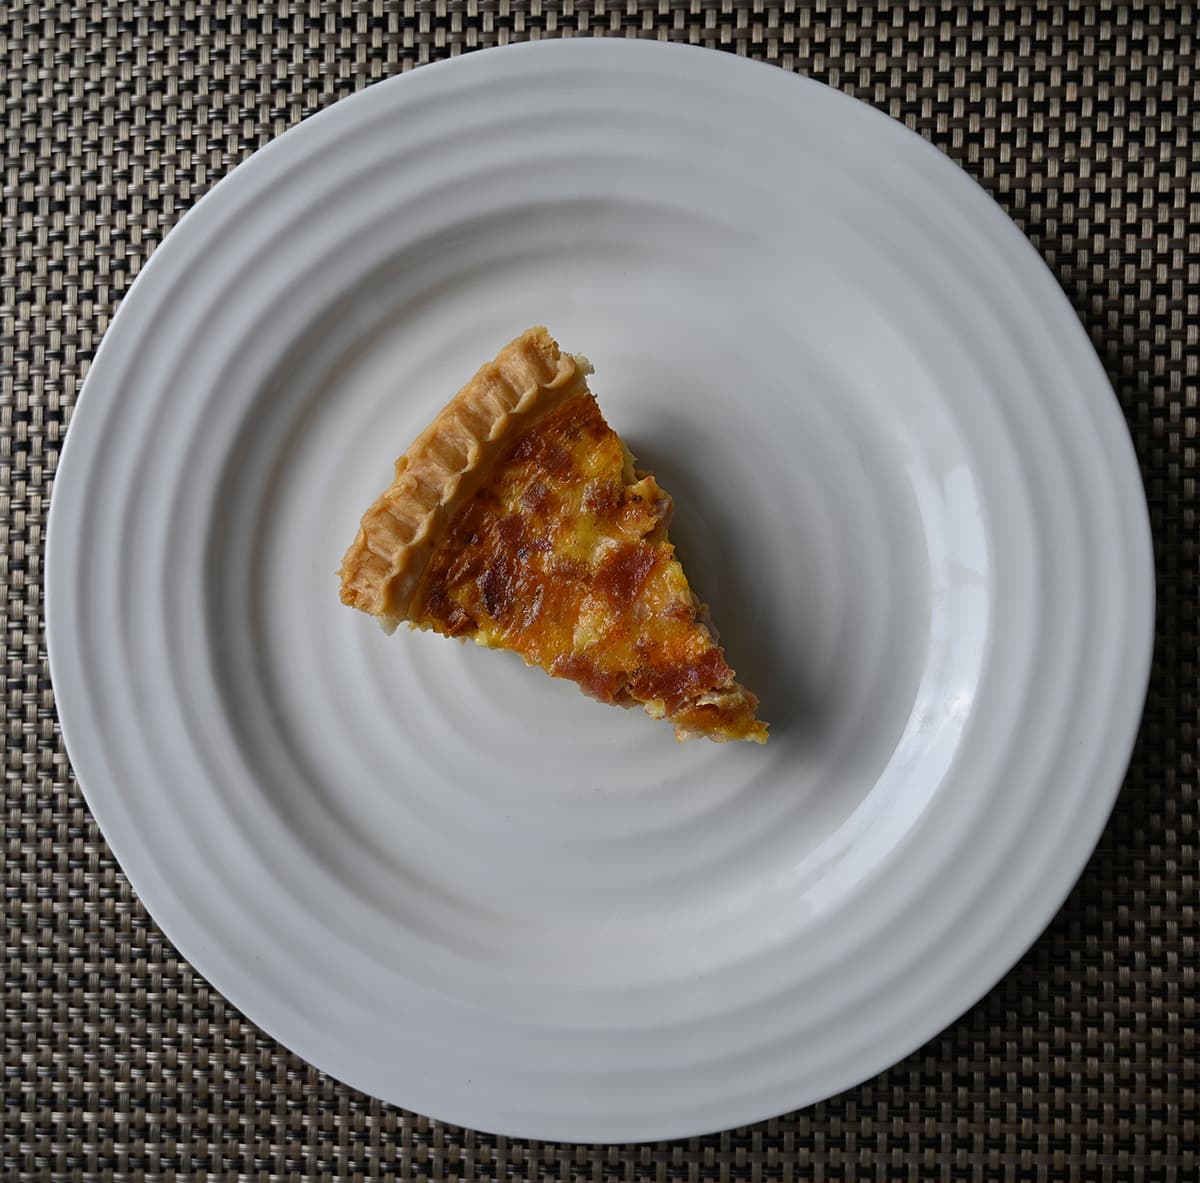 Top down image of one slice of quiche on a plate.